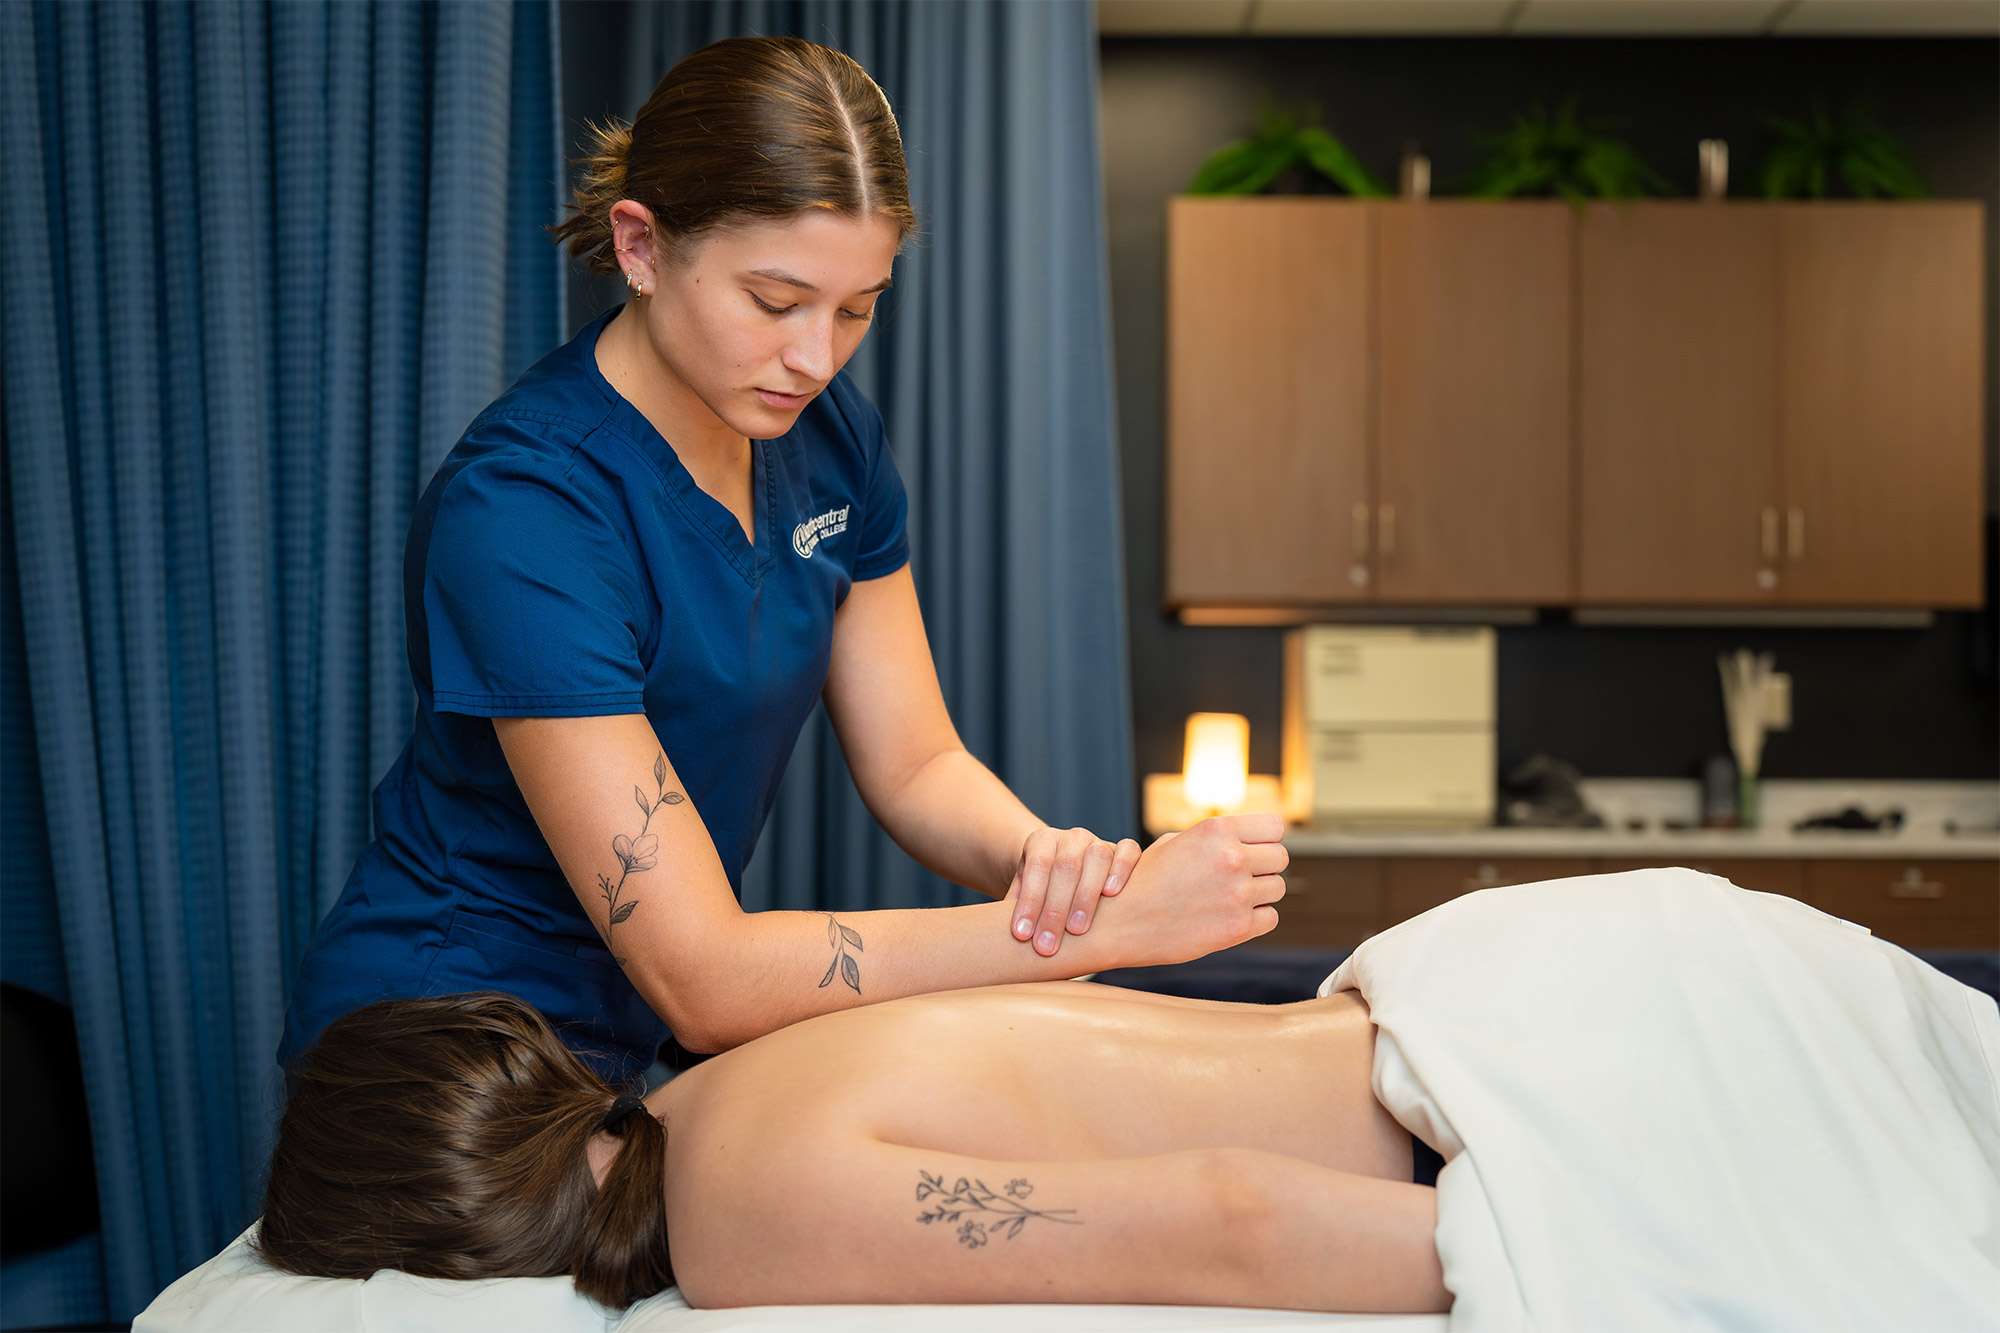 A massage therapist uses her elbow and forearm to massage the back of a patient.